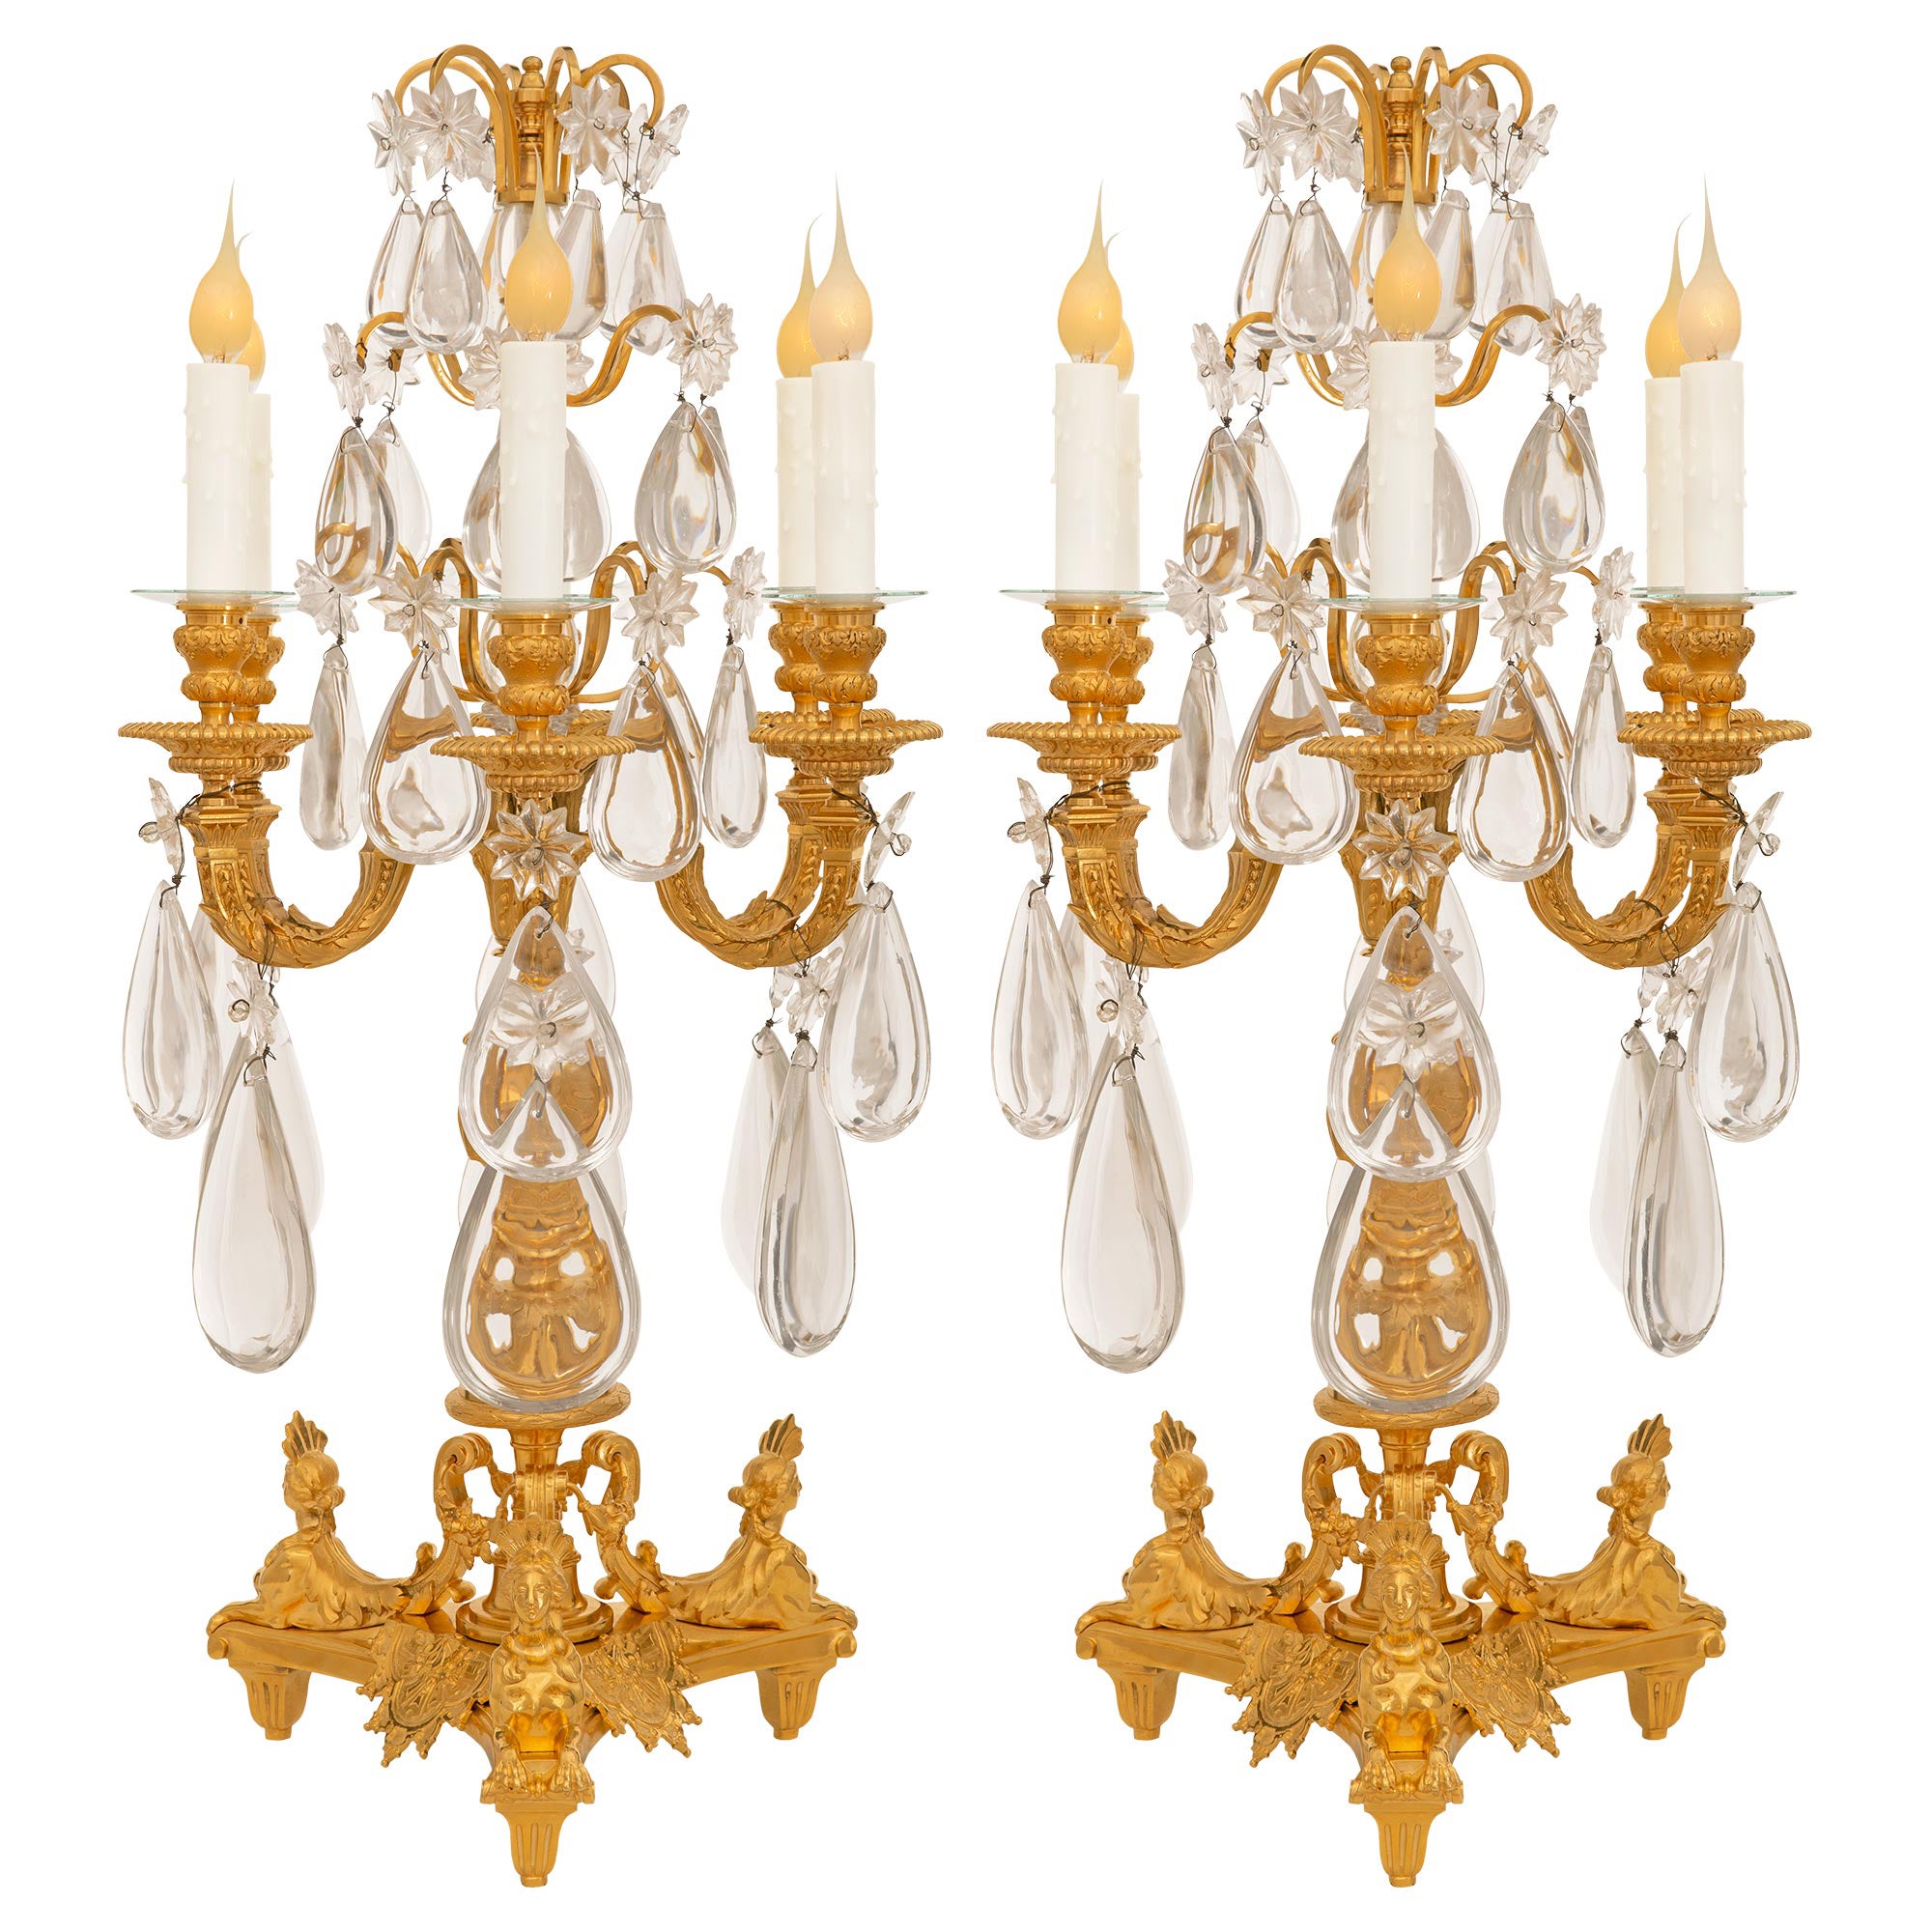 Pair Of French 19th Century Neo-Classical Period Ormolu & Baccarat Crystal Lamps For Sale